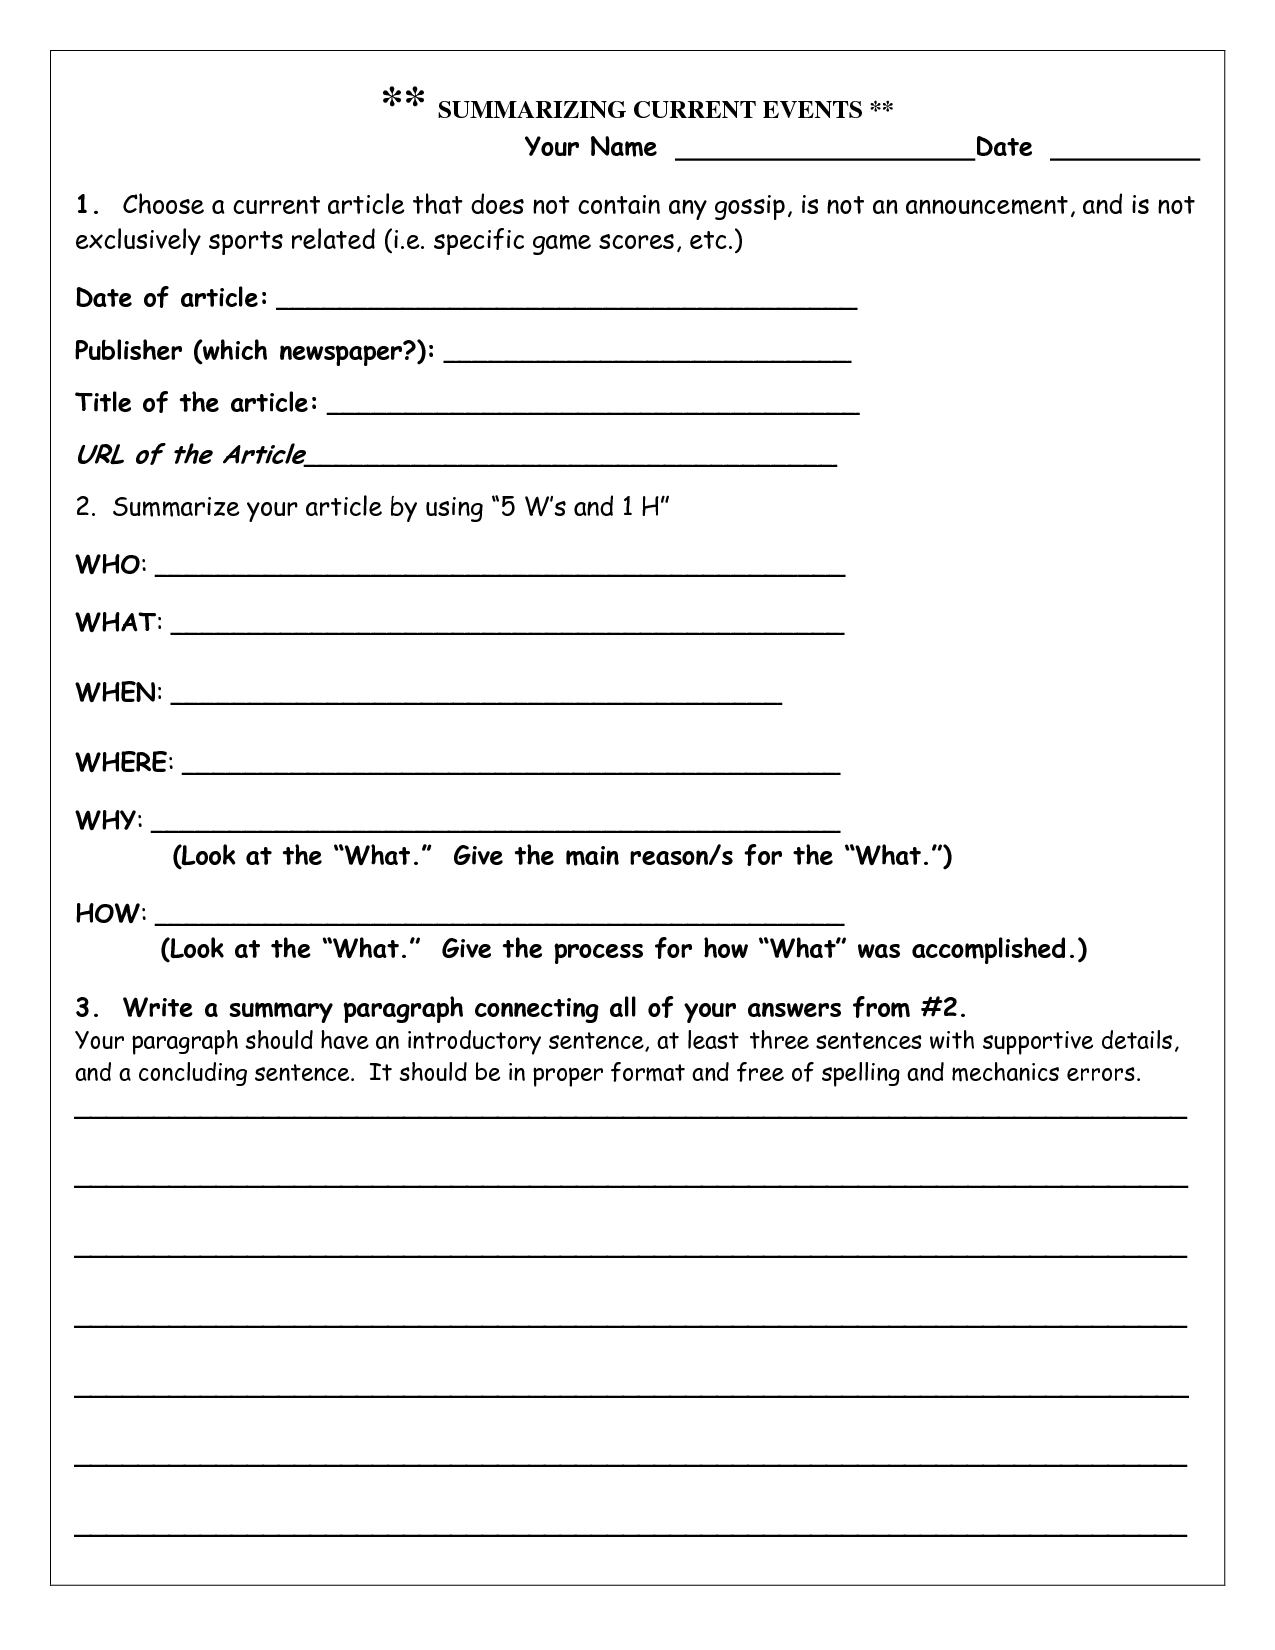 15-best-images-of-using-articles-worksheets-articles-worksheets-english-grammar-worksheets